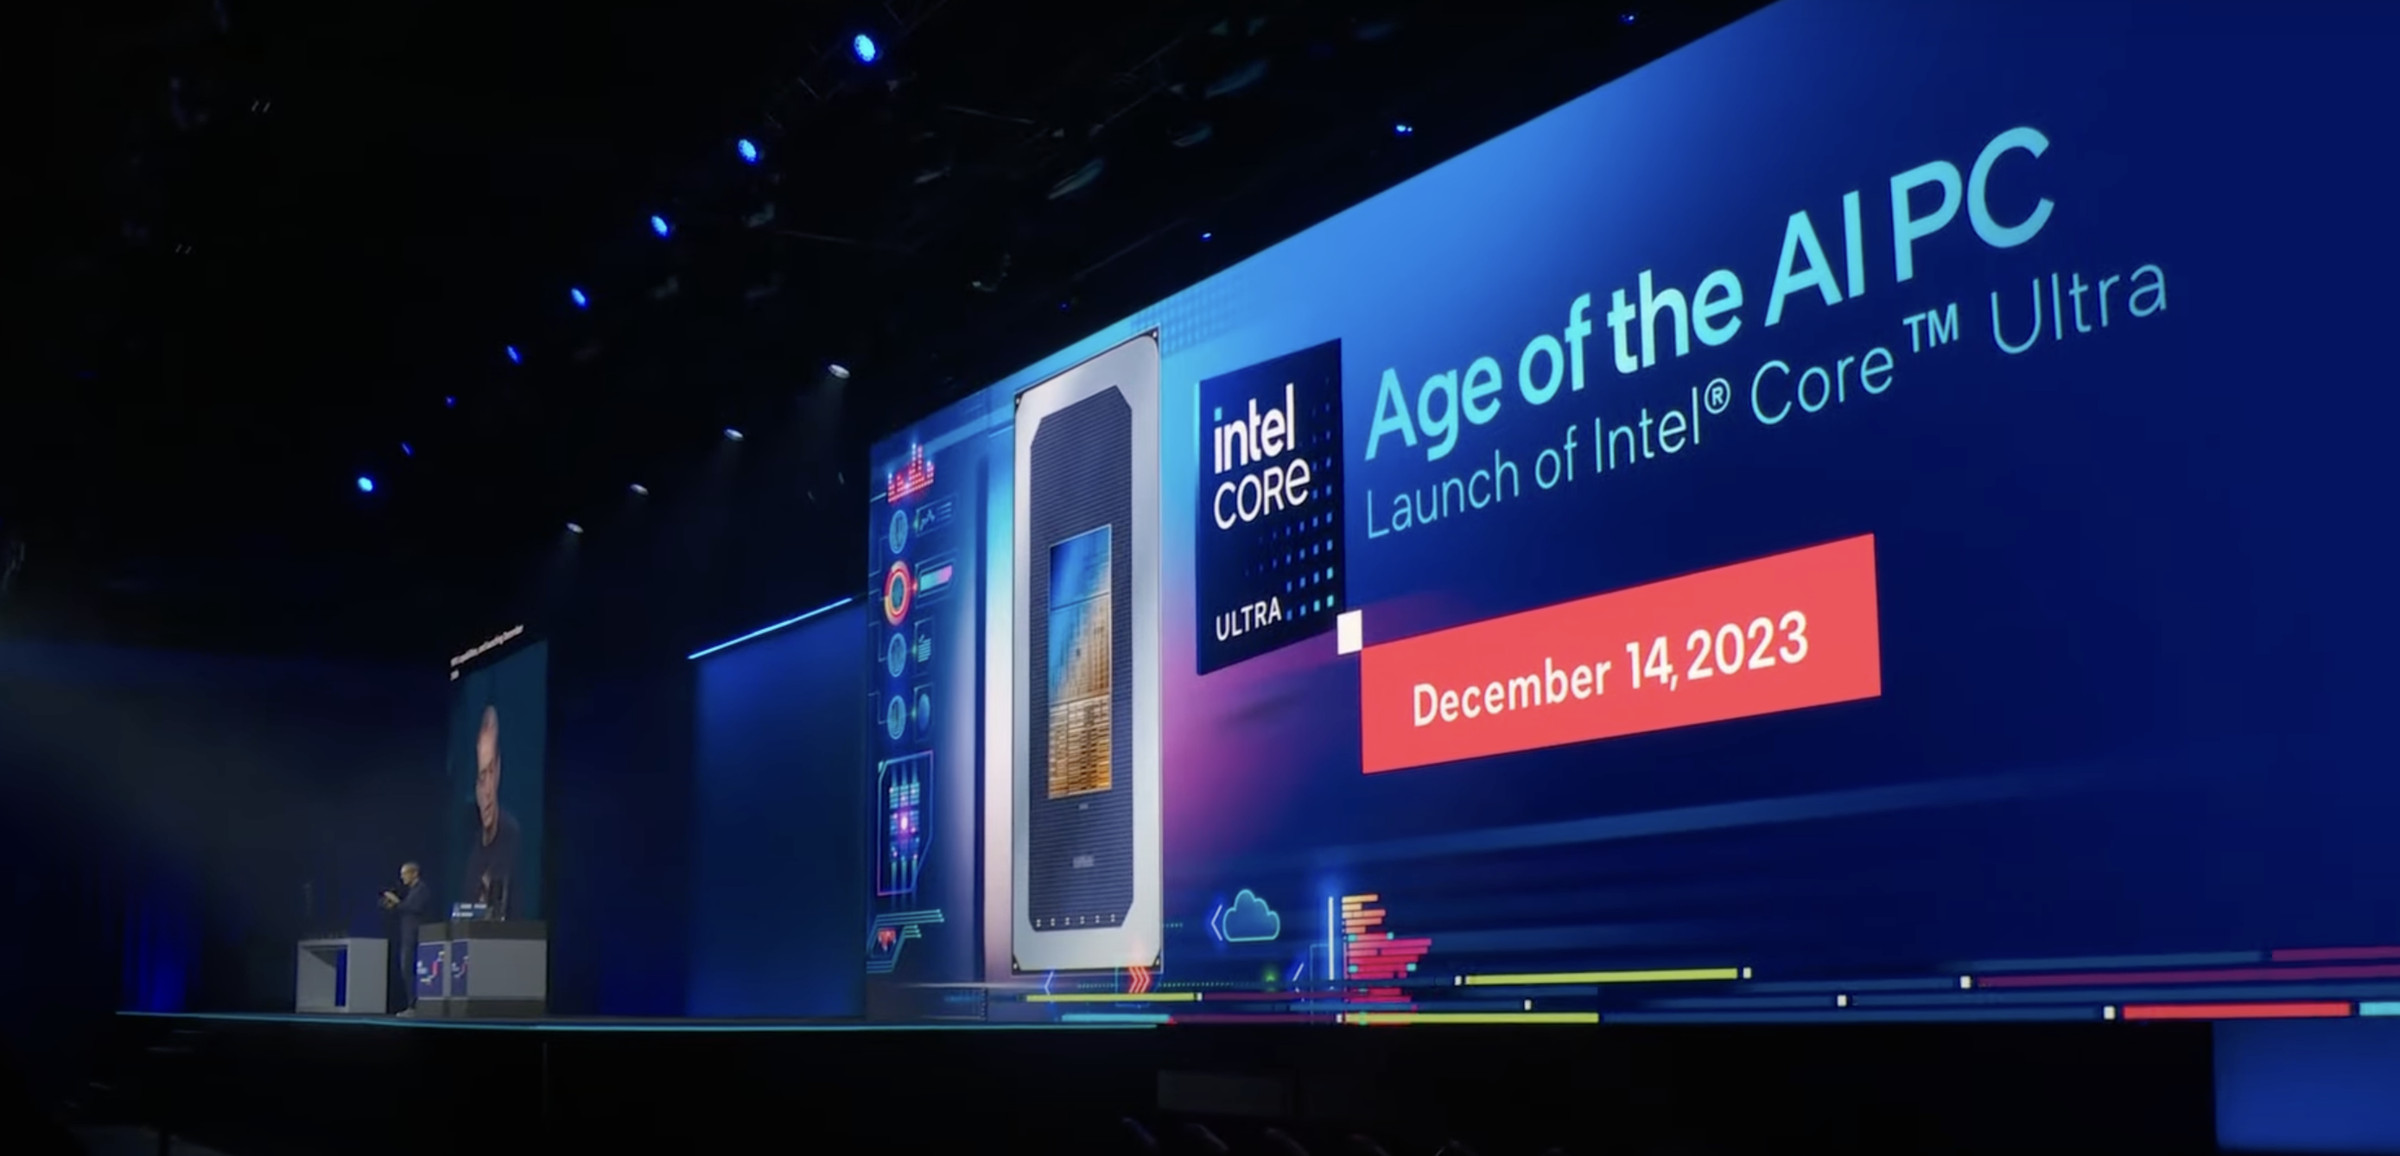 A slide at Intel’s Innovation keynote reading “Intel Core Ultra, Age of the AI PC, launch of the Intel Core Ultra, December 14, 2023.”